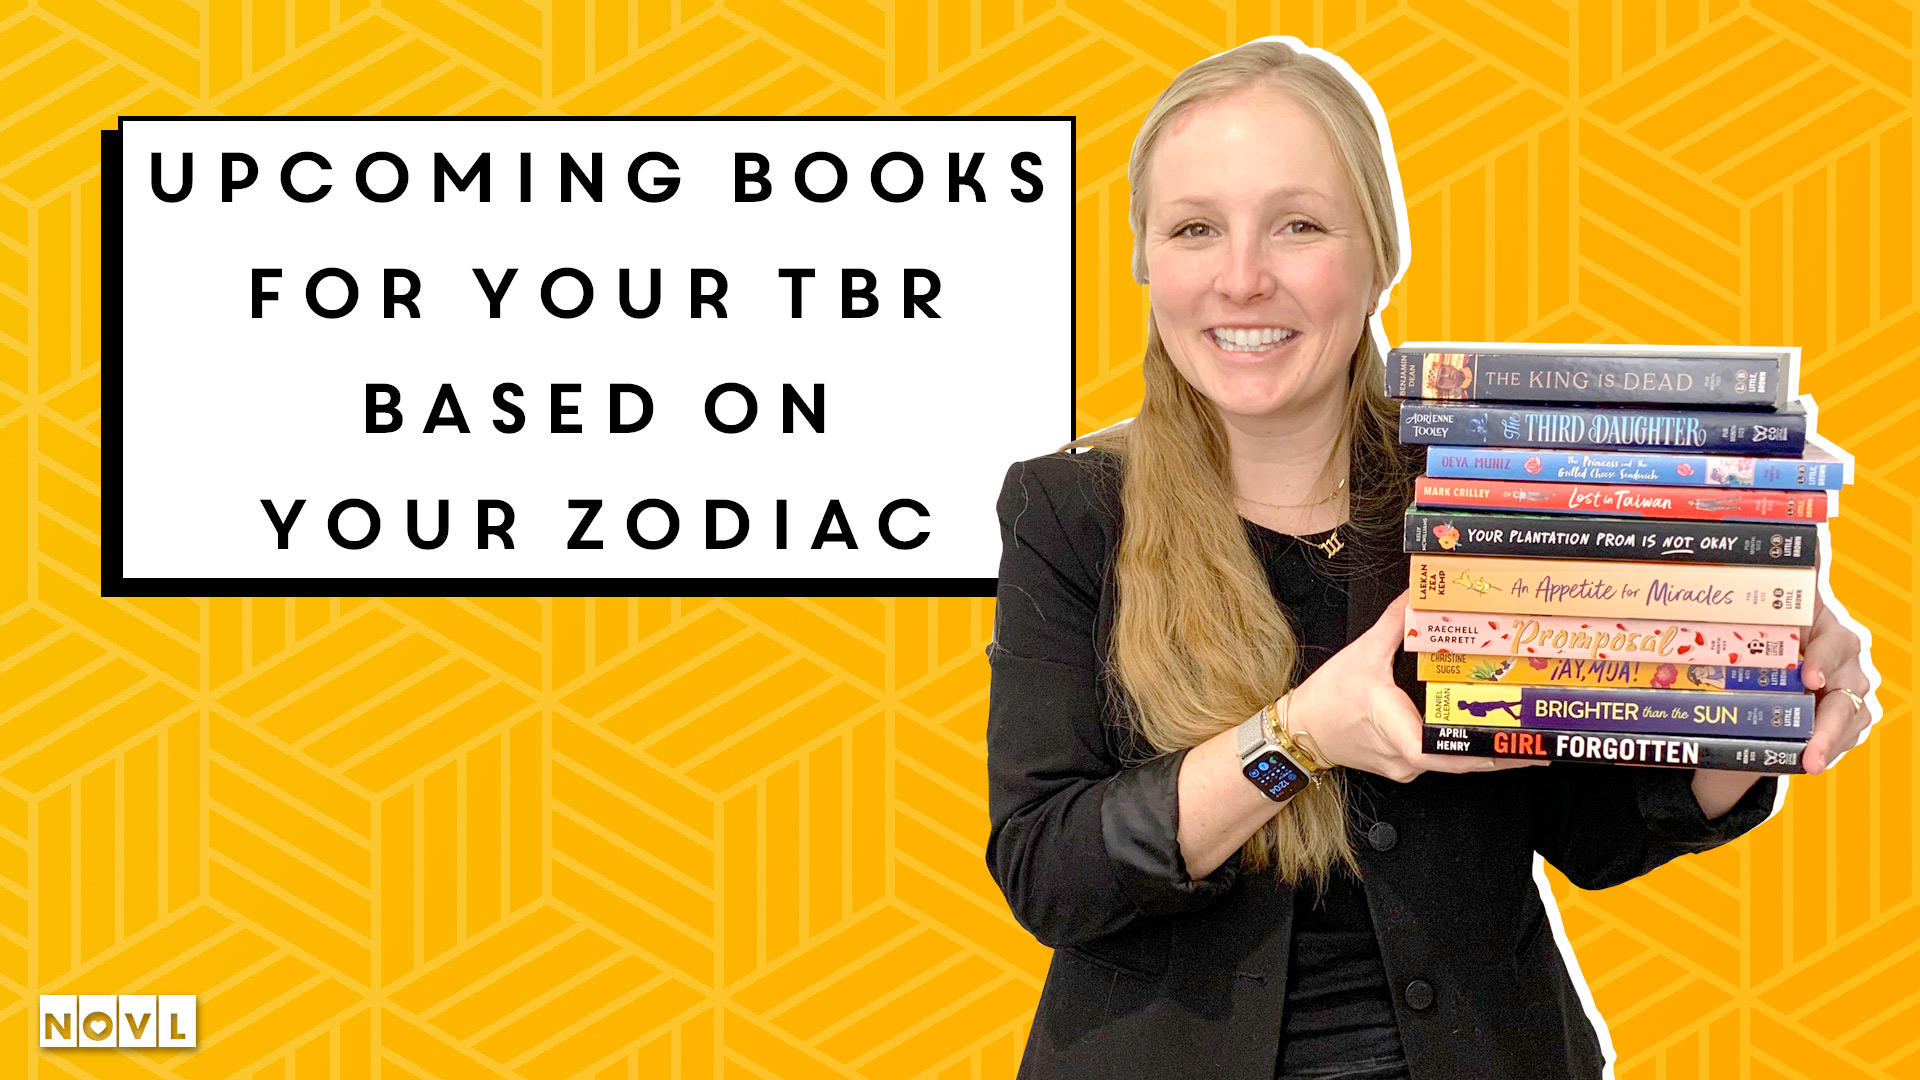 The NOVL Blog, Featured Image for Article: Upcoming Books for Your TBR, Based on Your Zodiac